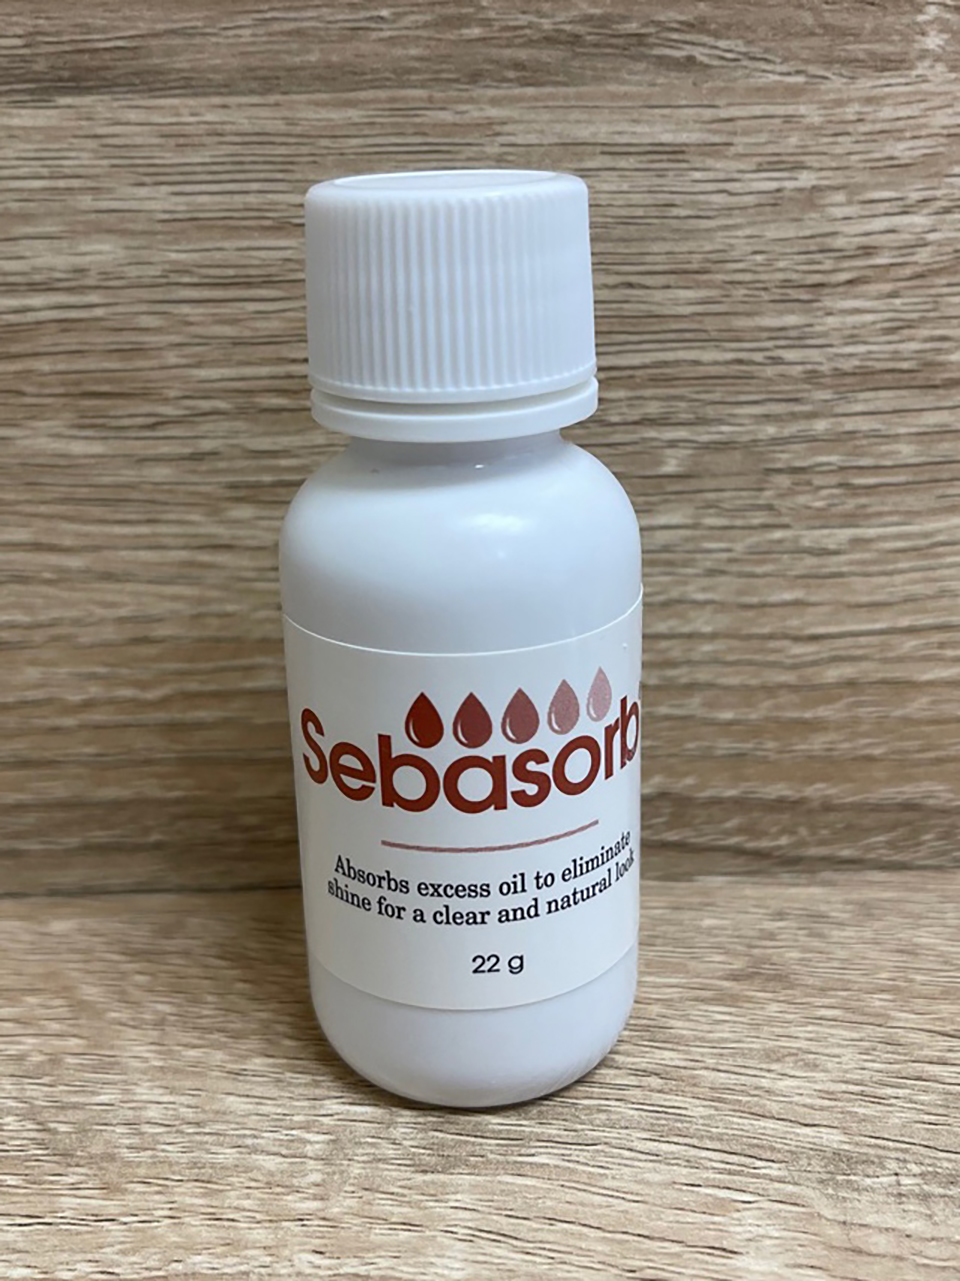 Sebasorb Lotion Absorbs Excess Oil for A Clear and Natural Look Skin, 22  Grams 